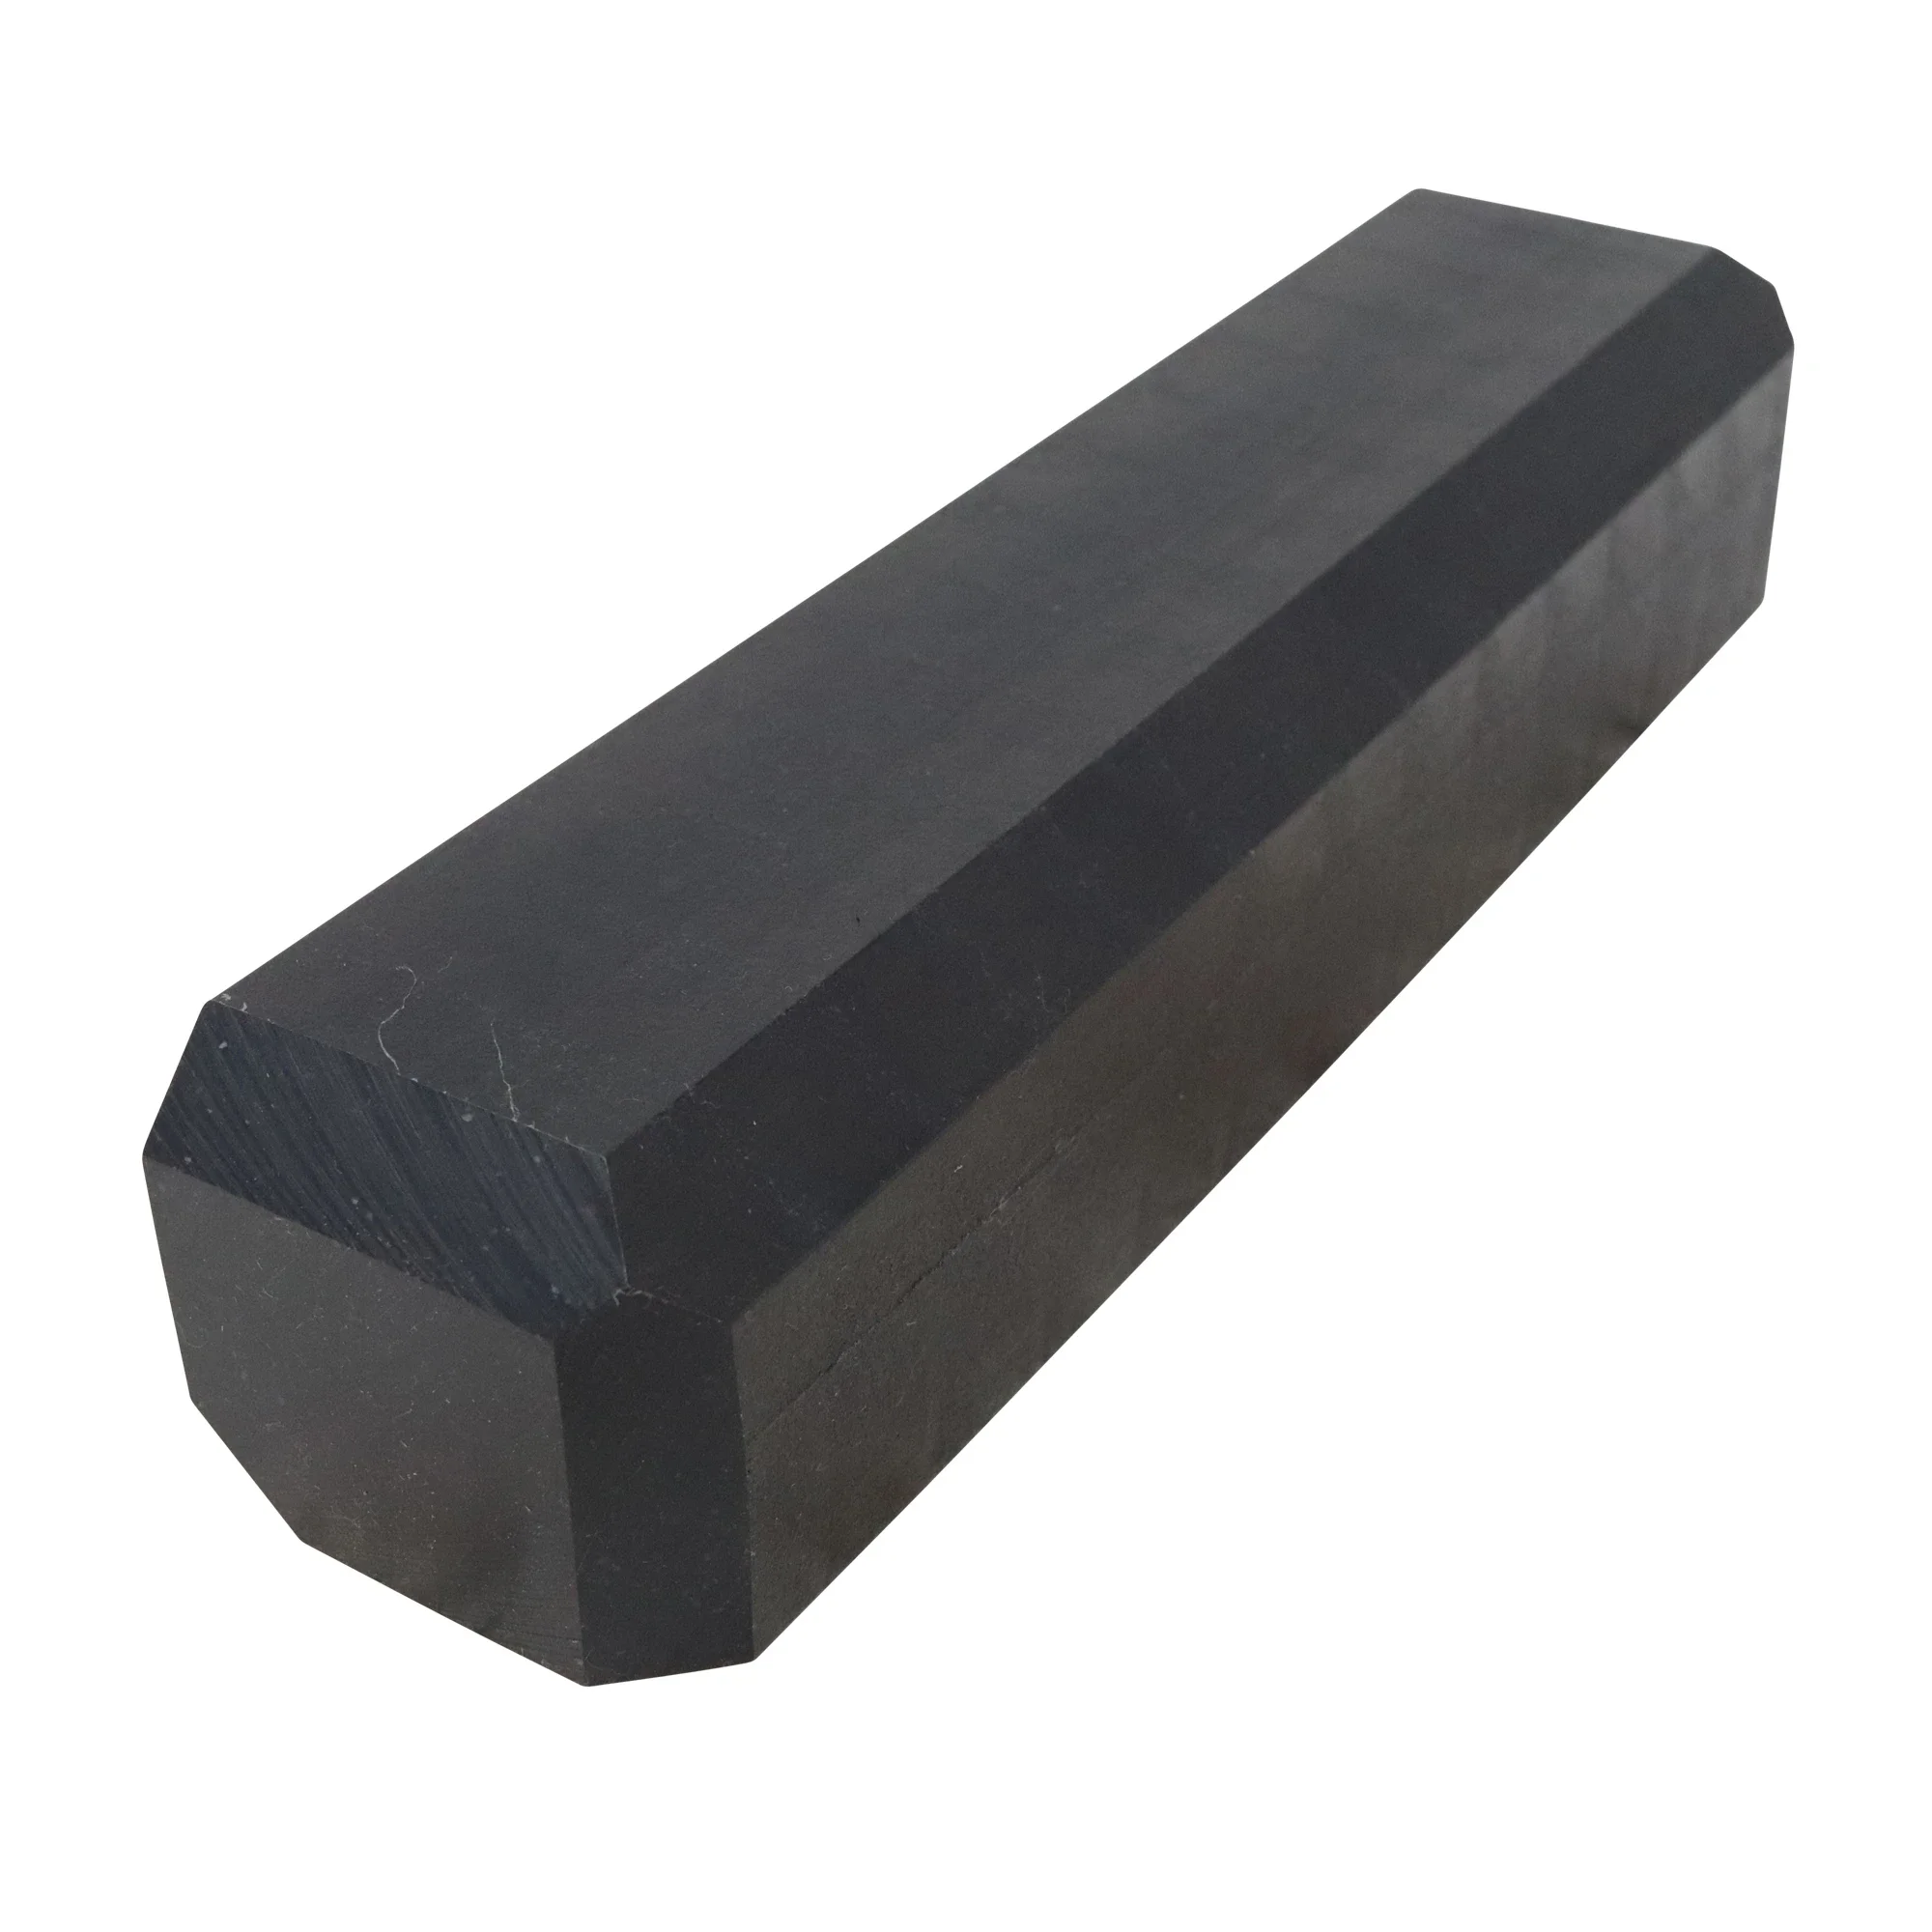 Wastebuilt® Replacement for Leach Lower Wear Block